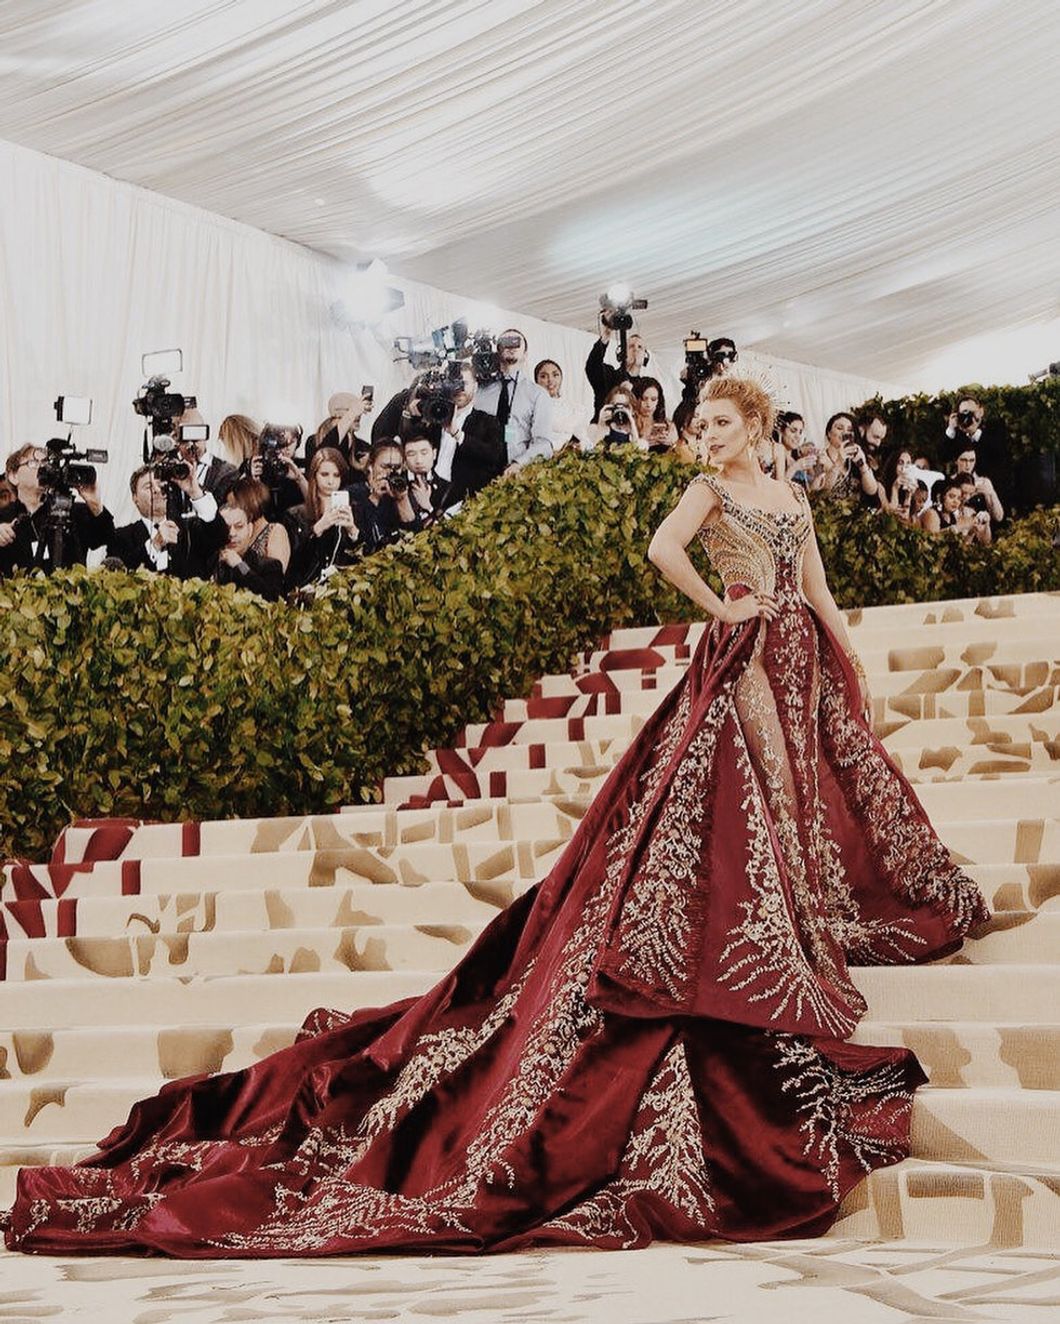 The Fashion 'Camp' Storm Coming With The 2019 Met Gala Is Totally Worth The Hype